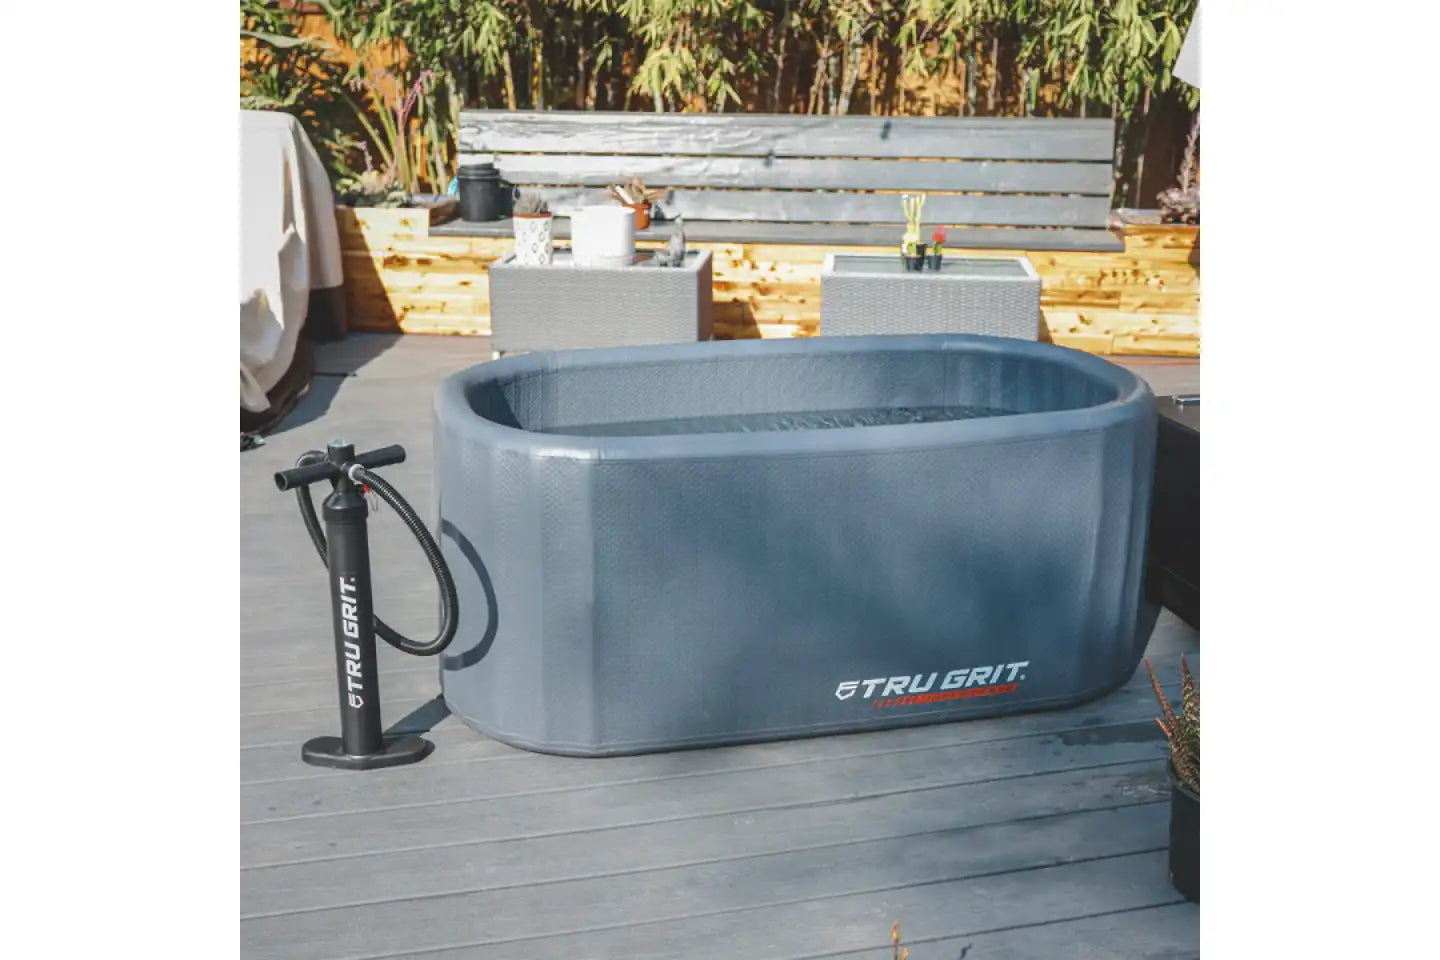 Penguin Chillers Cold Therapy Chiller + Tru Grit Inflatable Tub - 2